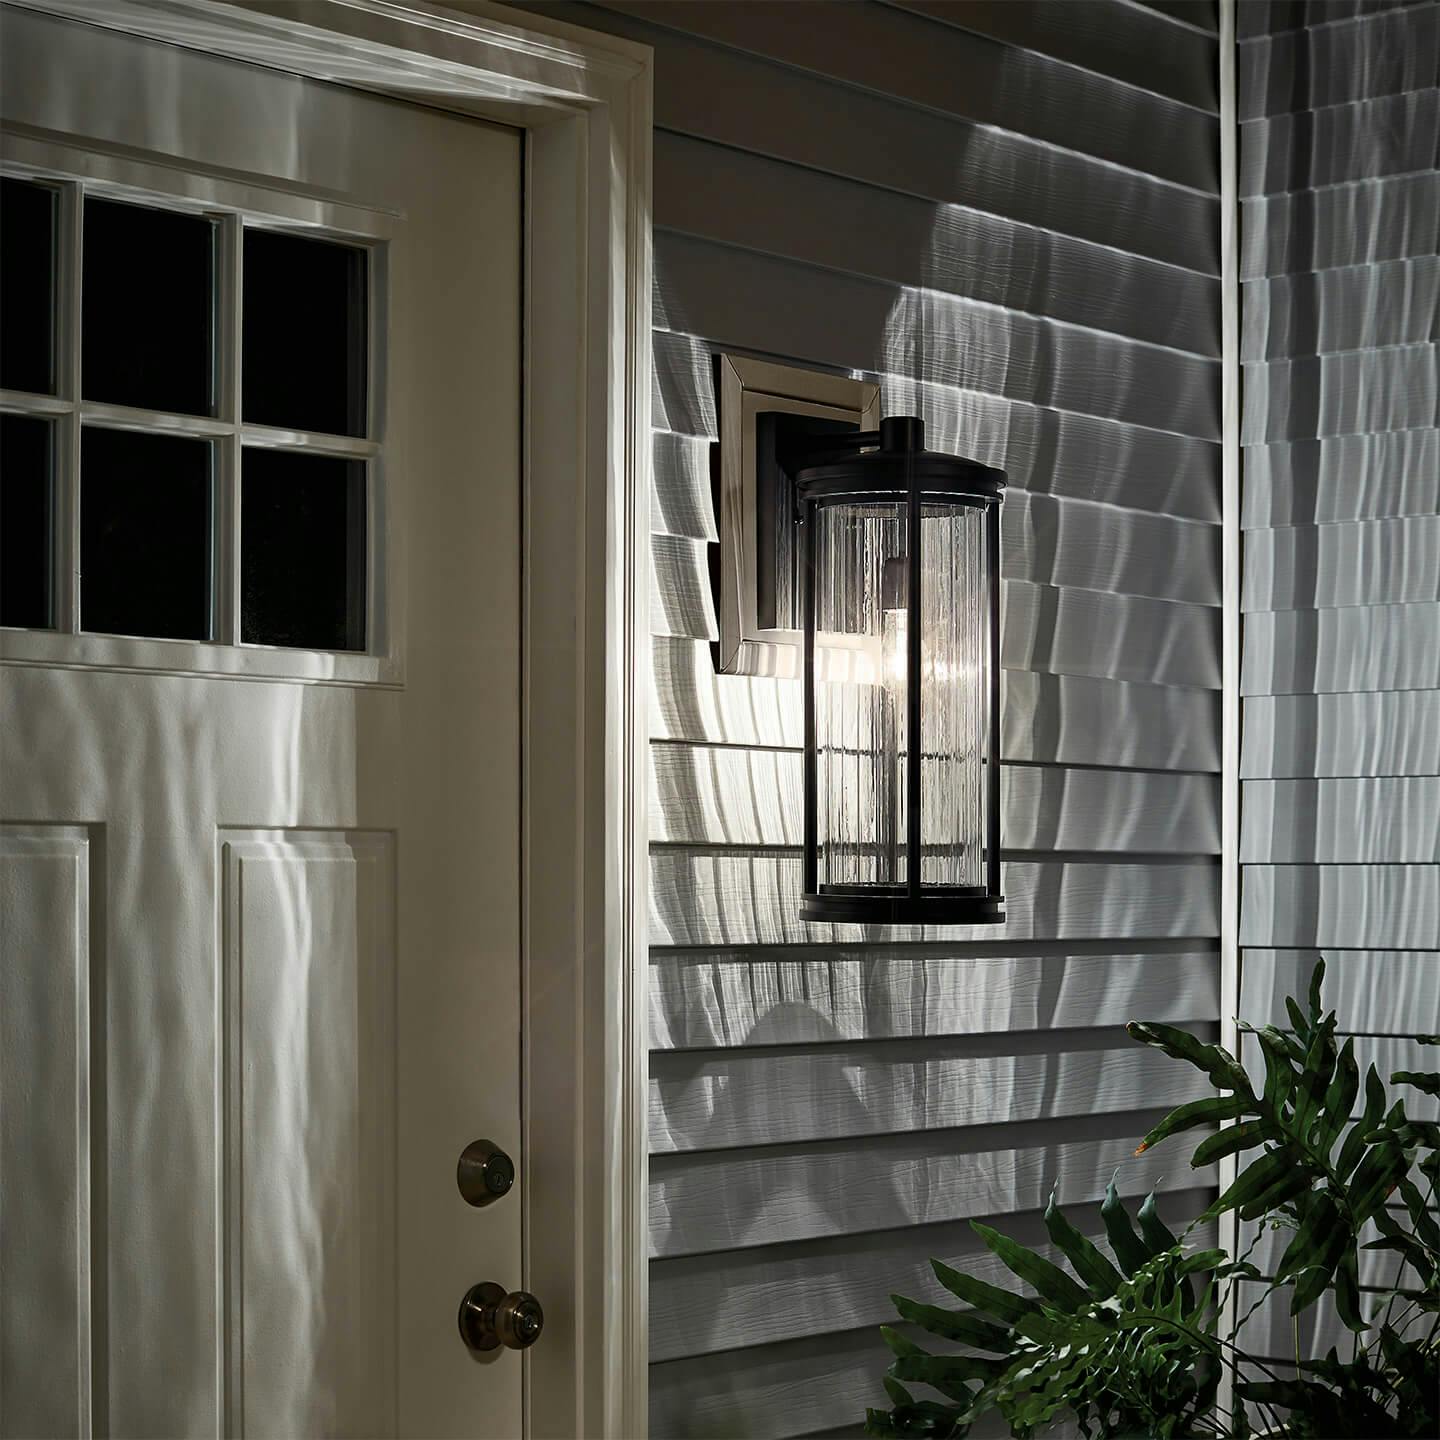 A Barras exterior wall light mounted to the side of a side door of a white house turned on at night